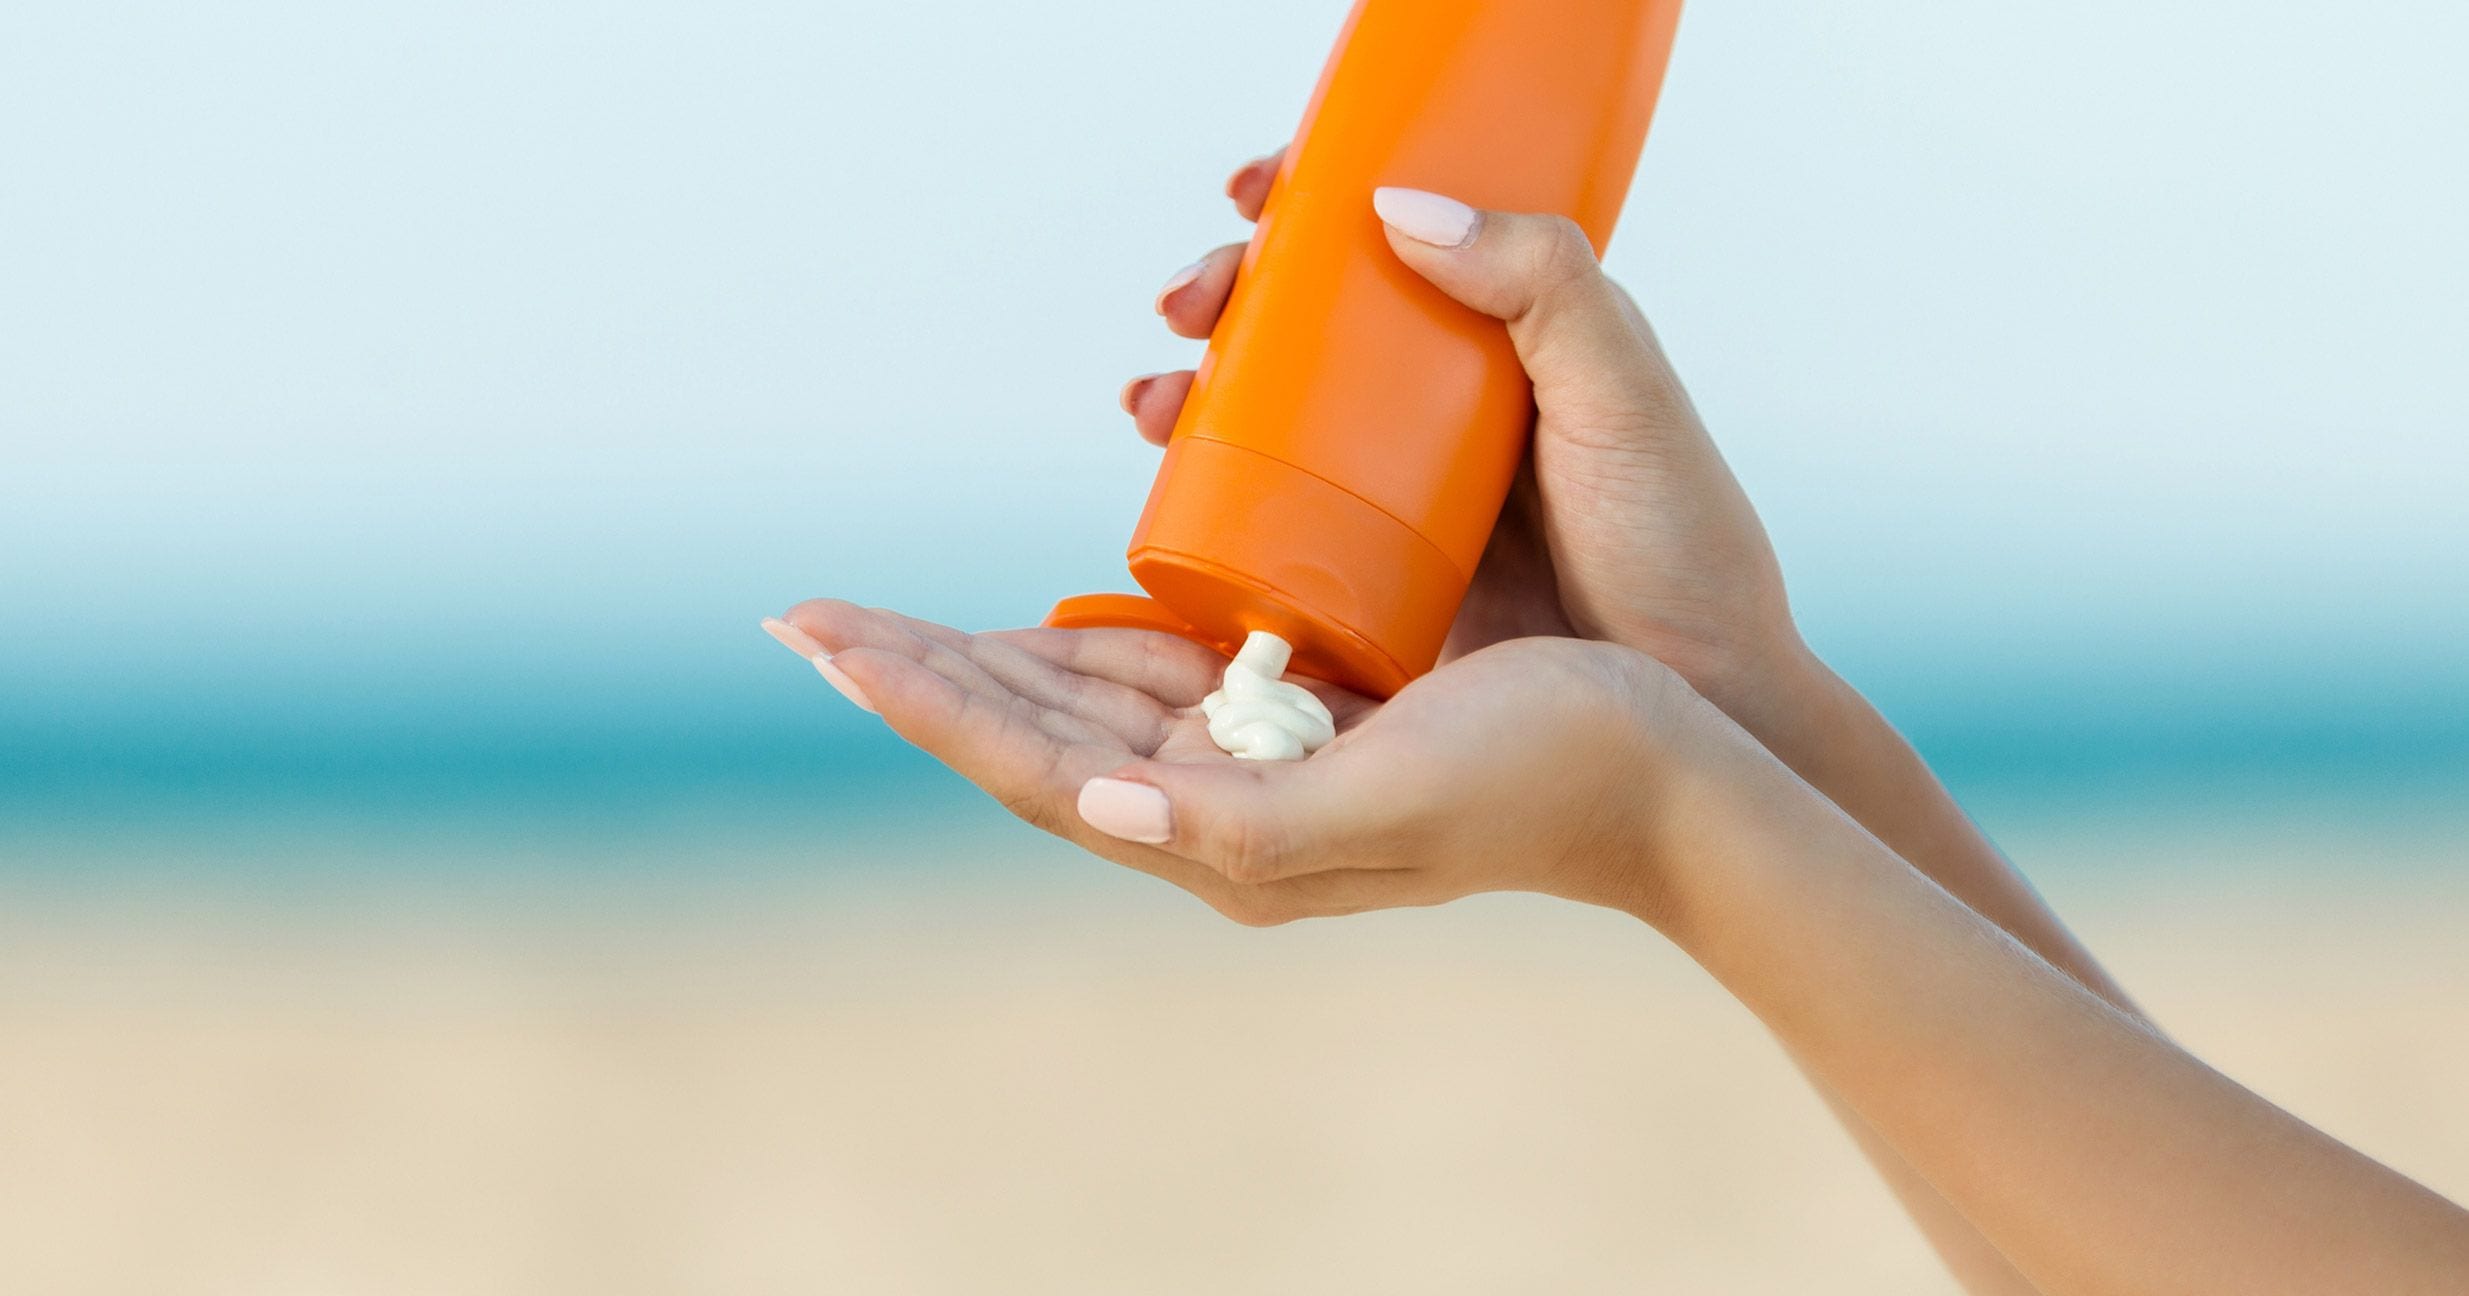 Sunscreen being applied at the beach